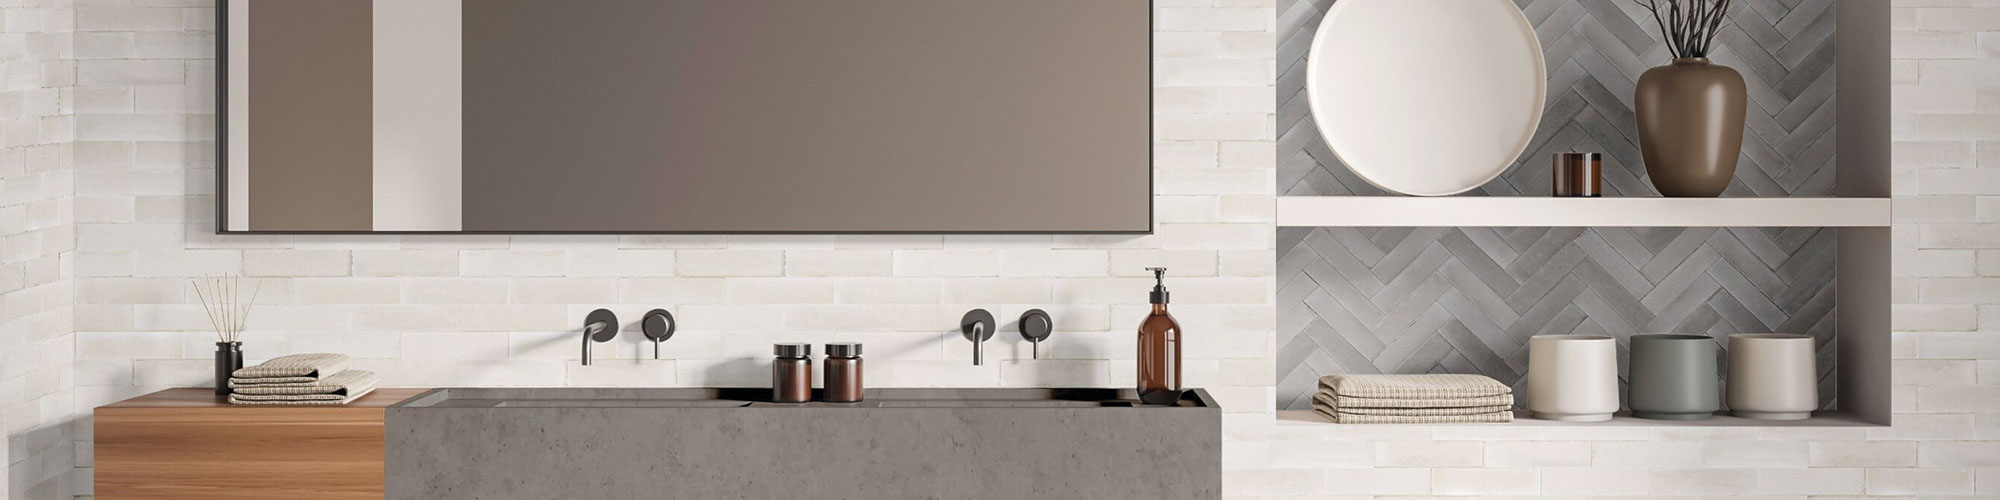 Modern bathroom with off-white subway tile backsplash, gray quartz dual vanity with butcher block accent, built-in shelves with gray herringbone wall tile.